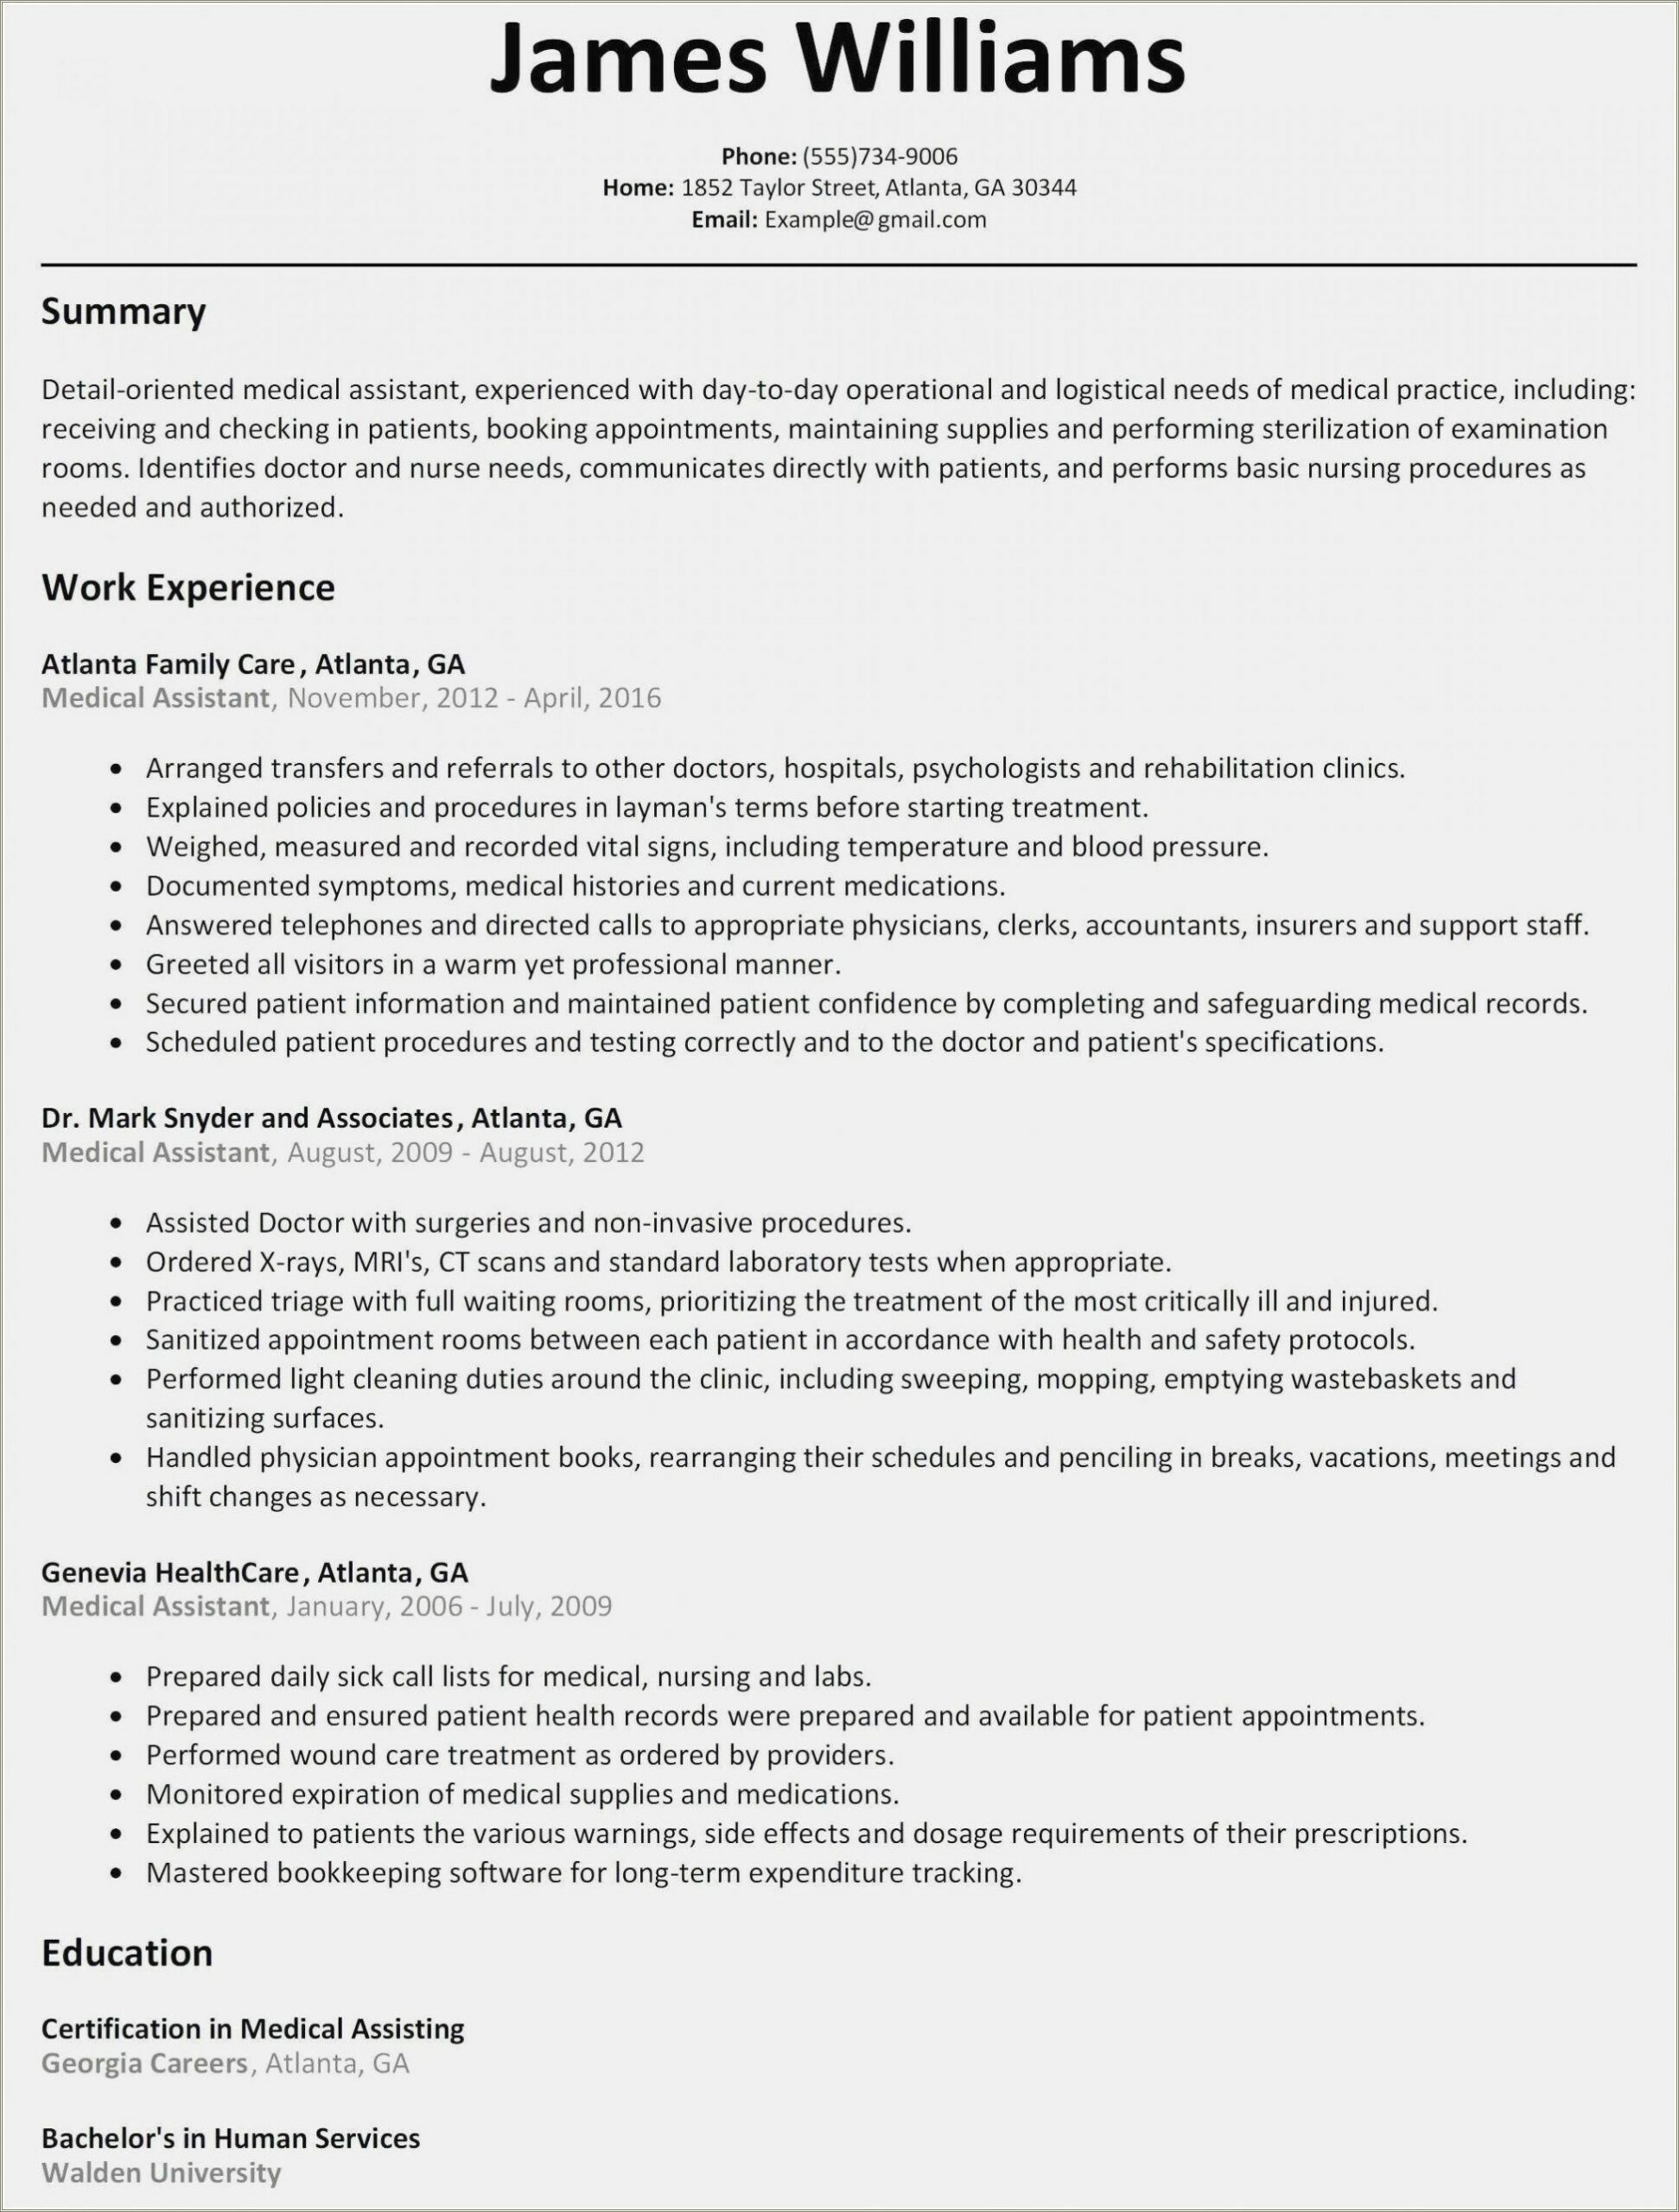 Customer Service Resume Objective Or Summary Examples